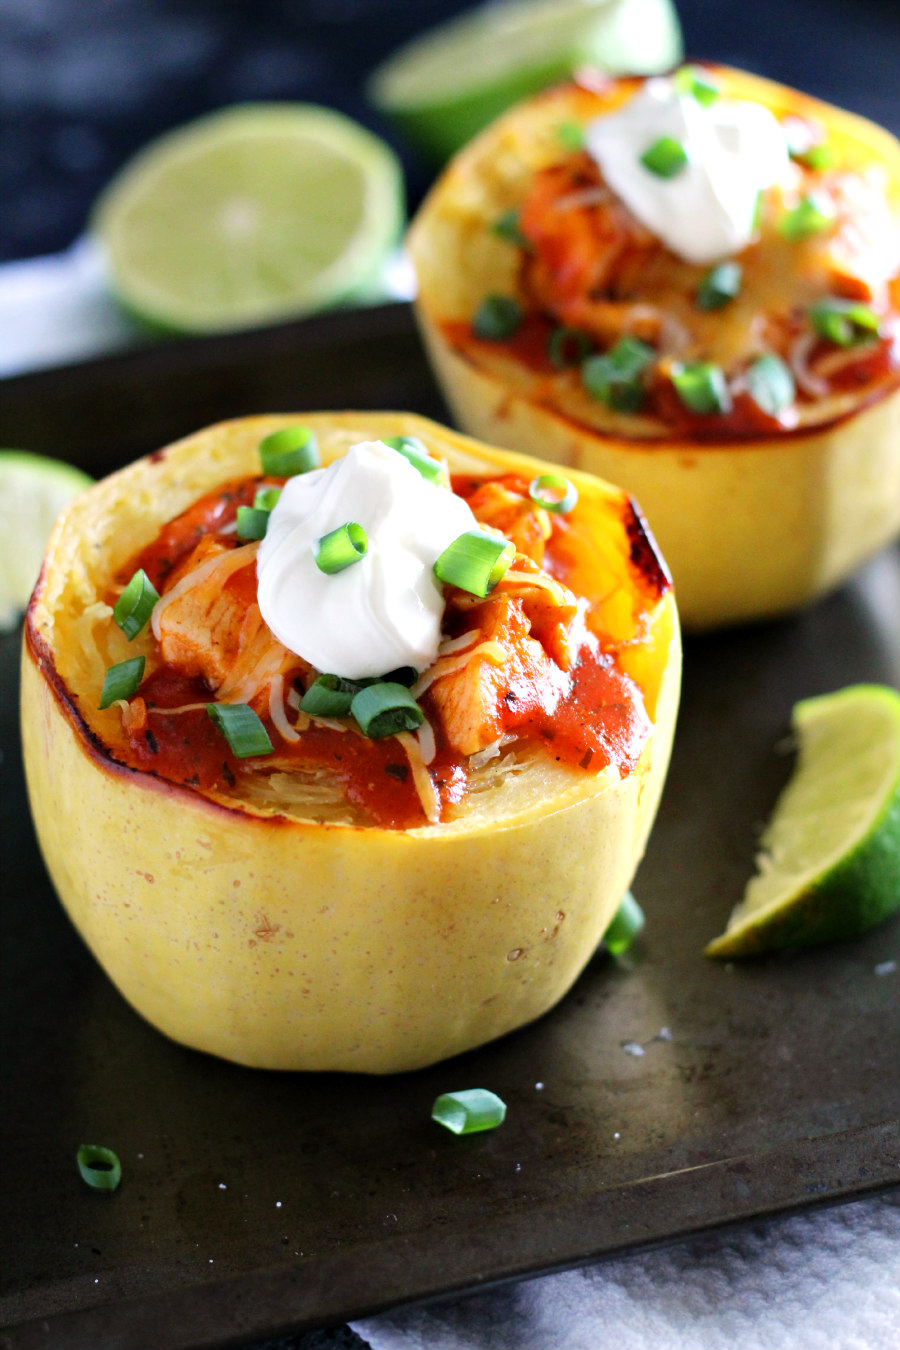 Looking for a low-carb meal that's completely satisfying? This Chicken Enchilada Spaghetti Squash is the answer! Cook the squash ahead during your weekly meal prep then make this cheap healthy meal for a busy weeknight dinner.